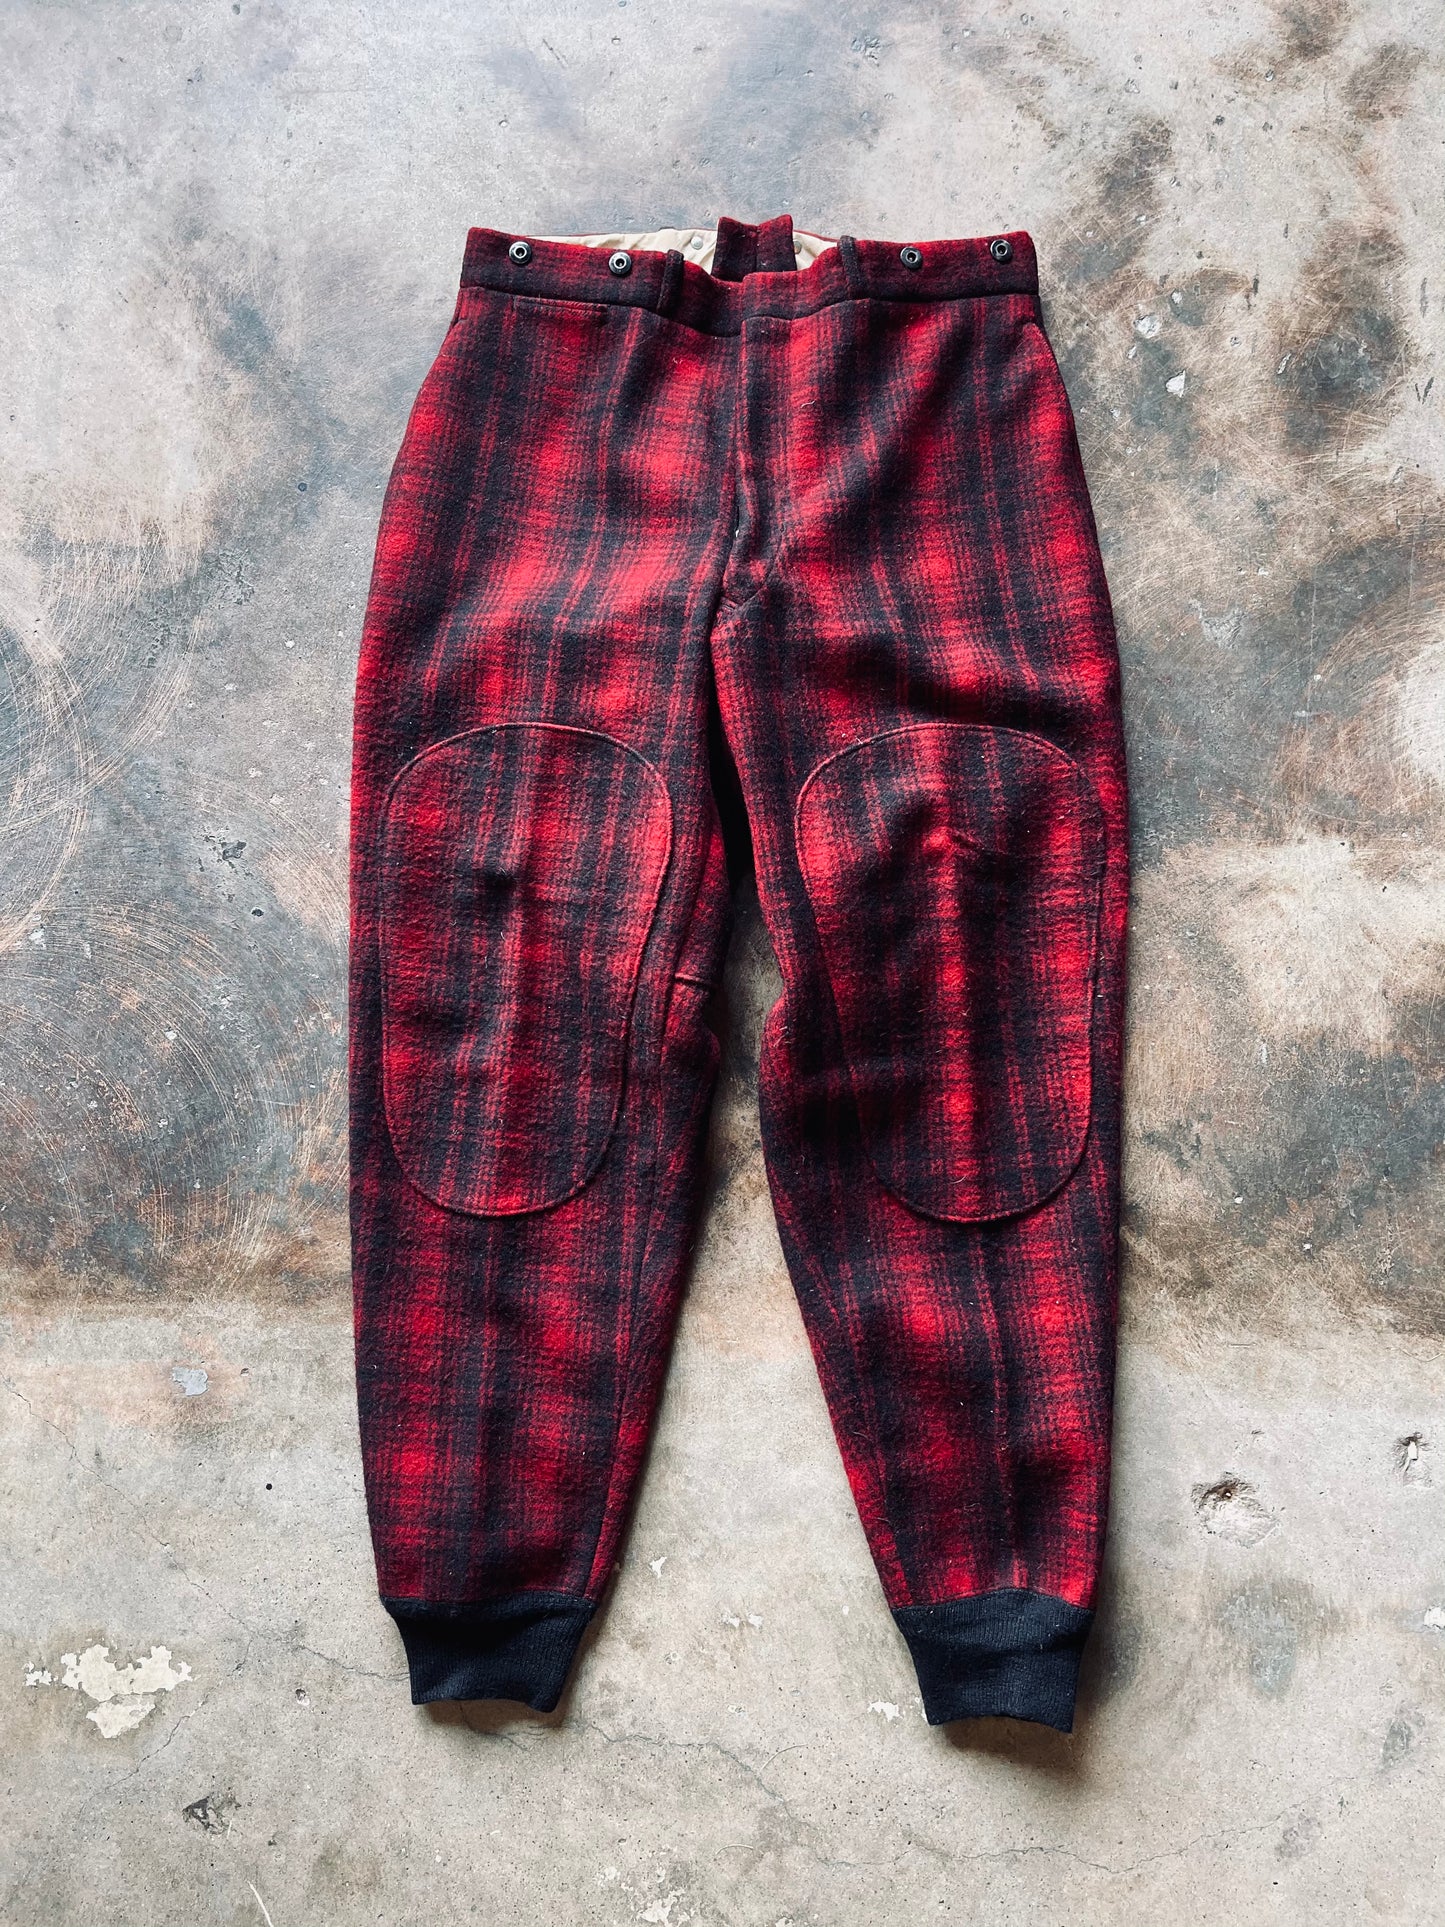 1950’s/60’s Woolrich Plaid Hunting Trouser | 35R